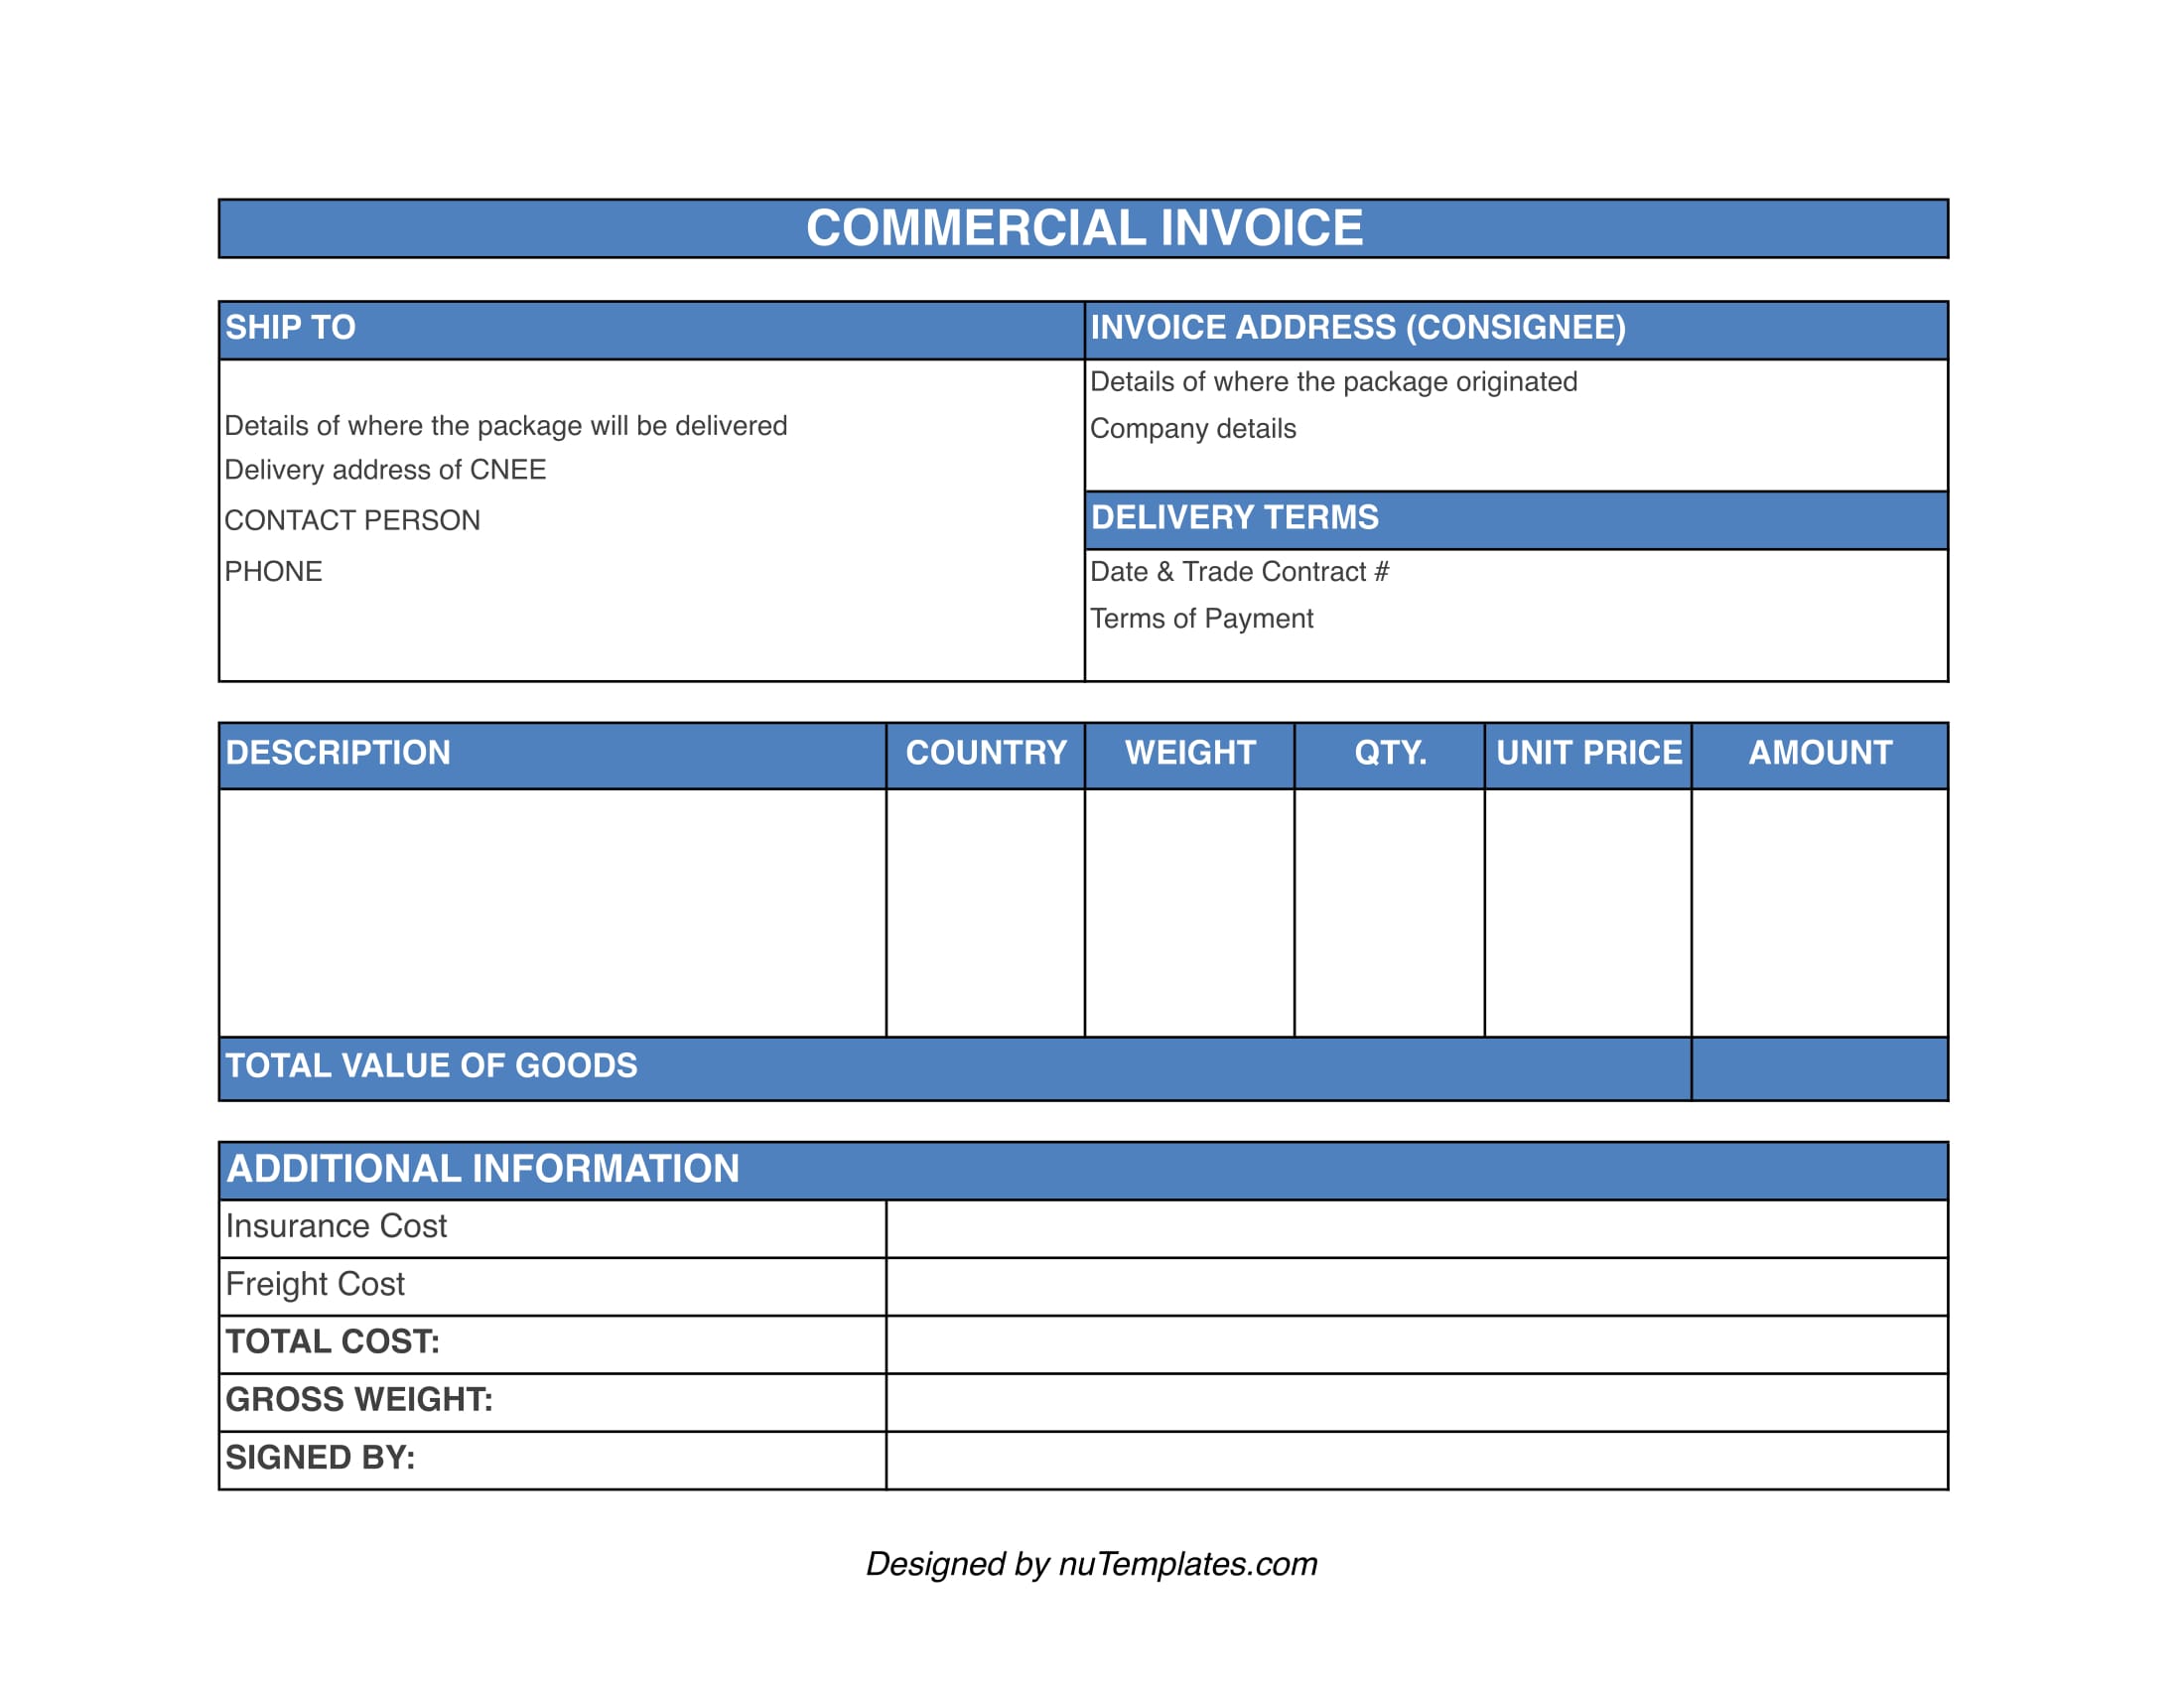 commercial-invoice-template-commercial-invoices-nutemplates